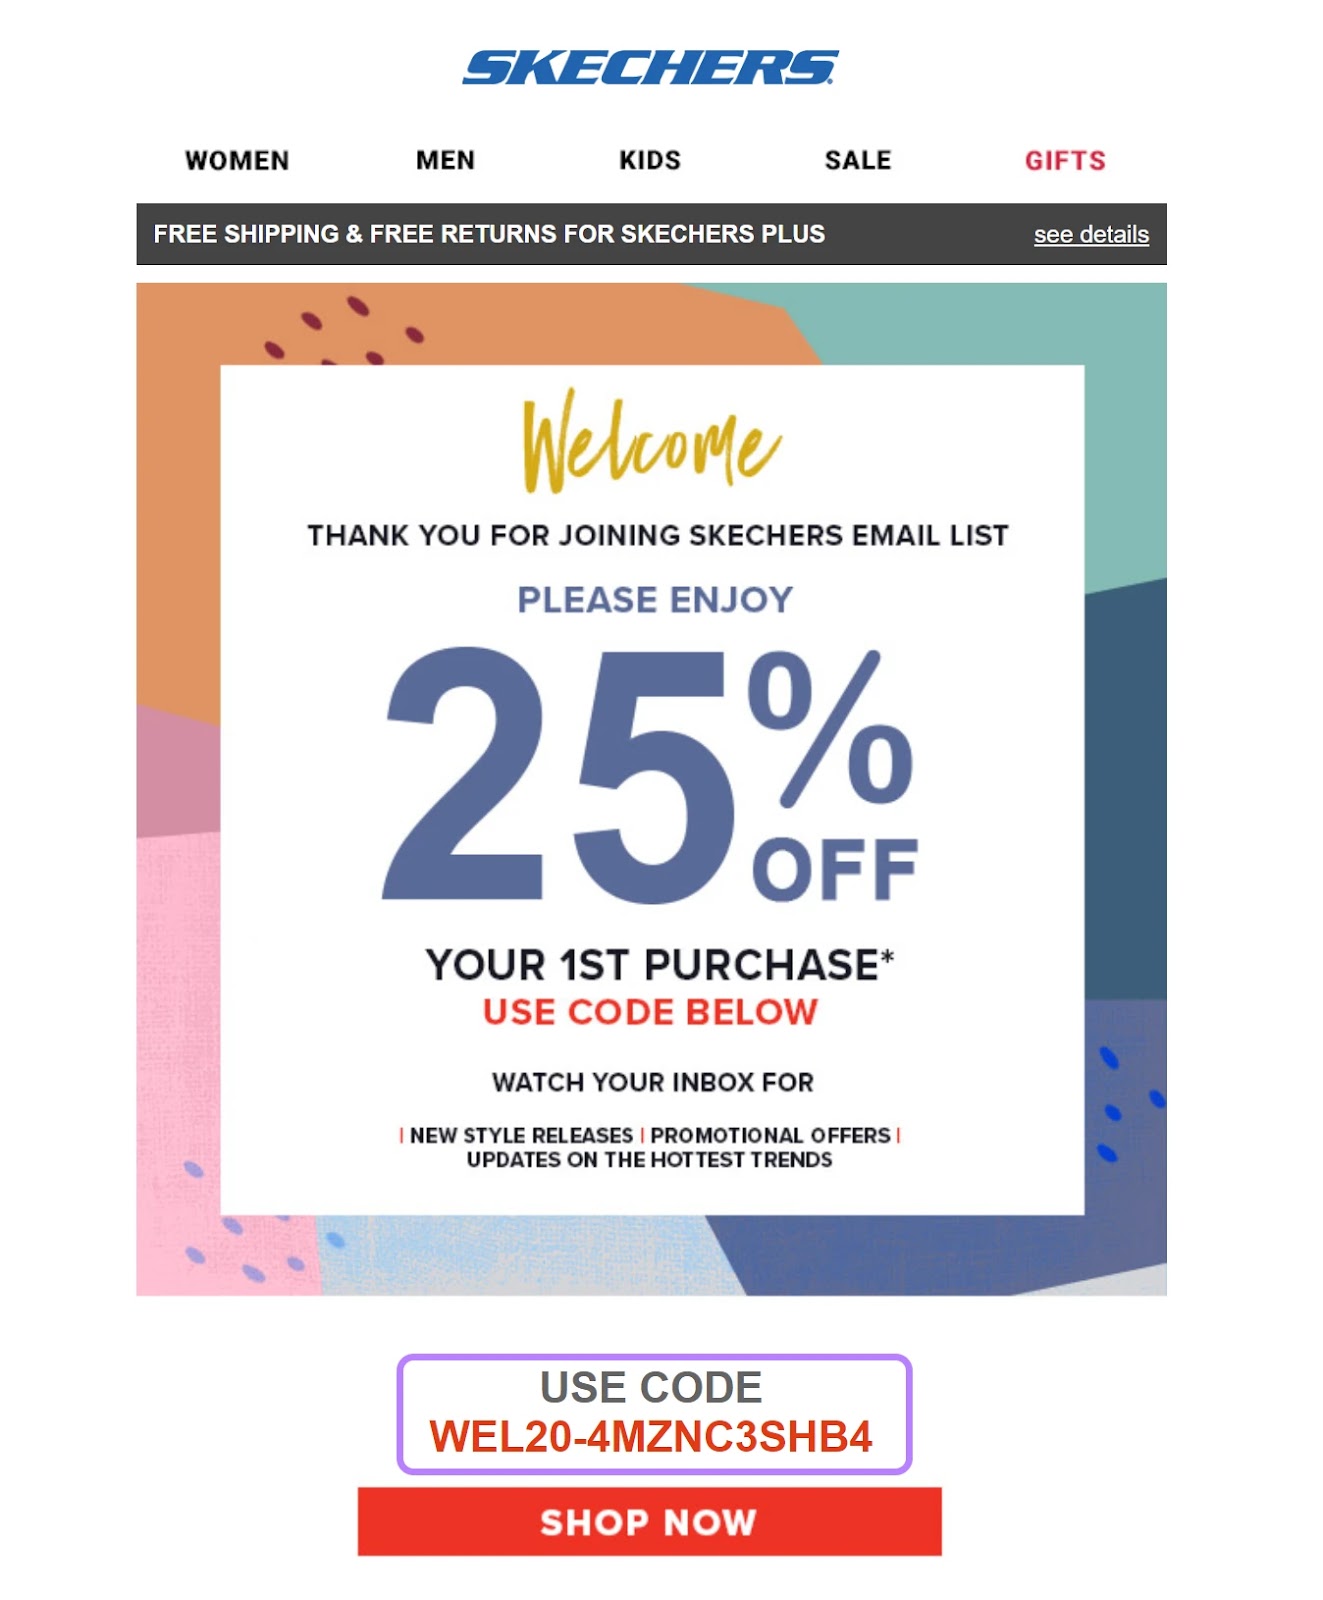 Skechers's email to a new customer with a 20% discount